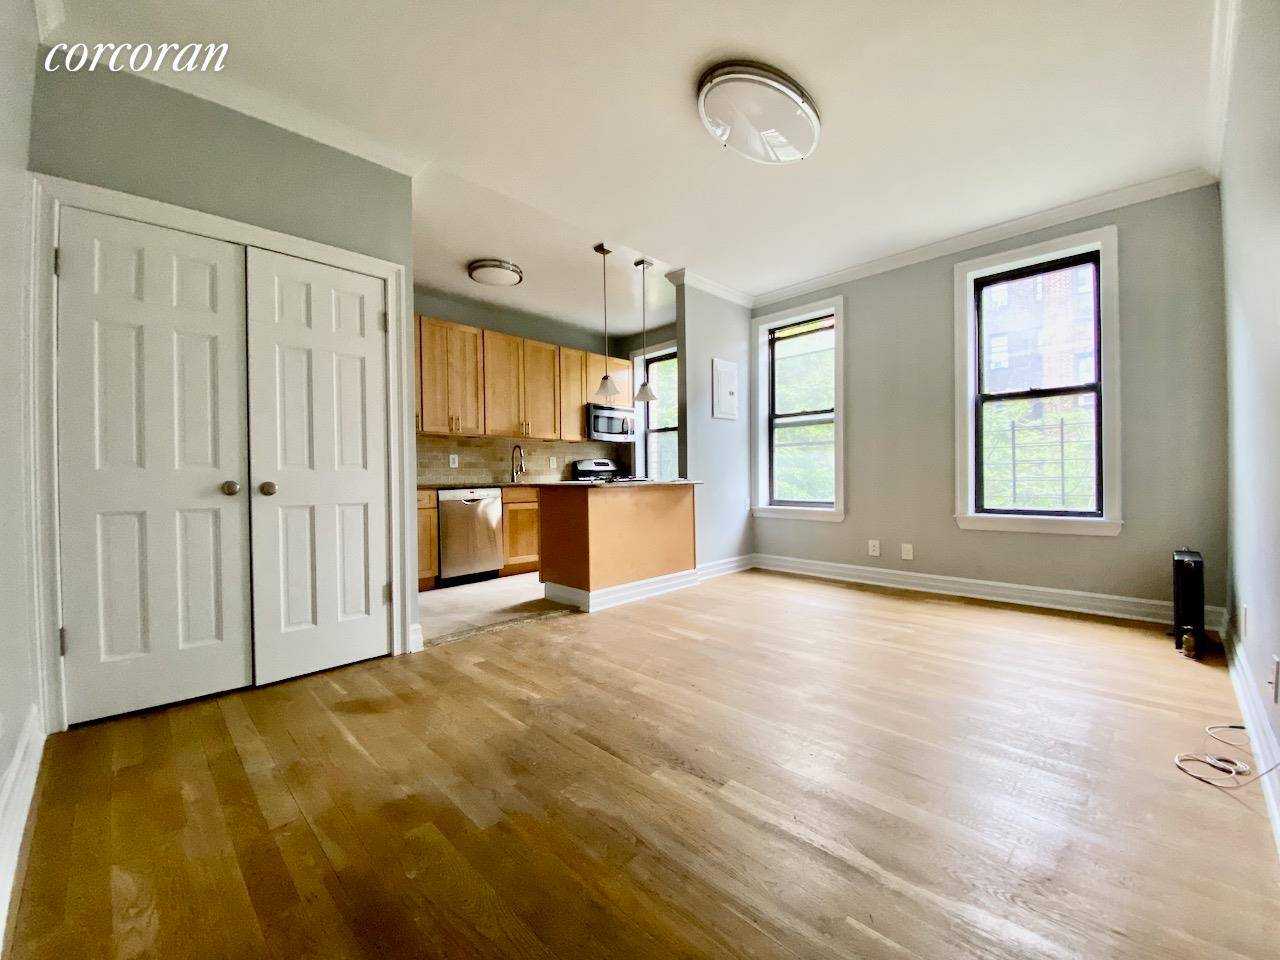 3 Bedroom 1. 5 bath apartment in the Heart of South Harlem !